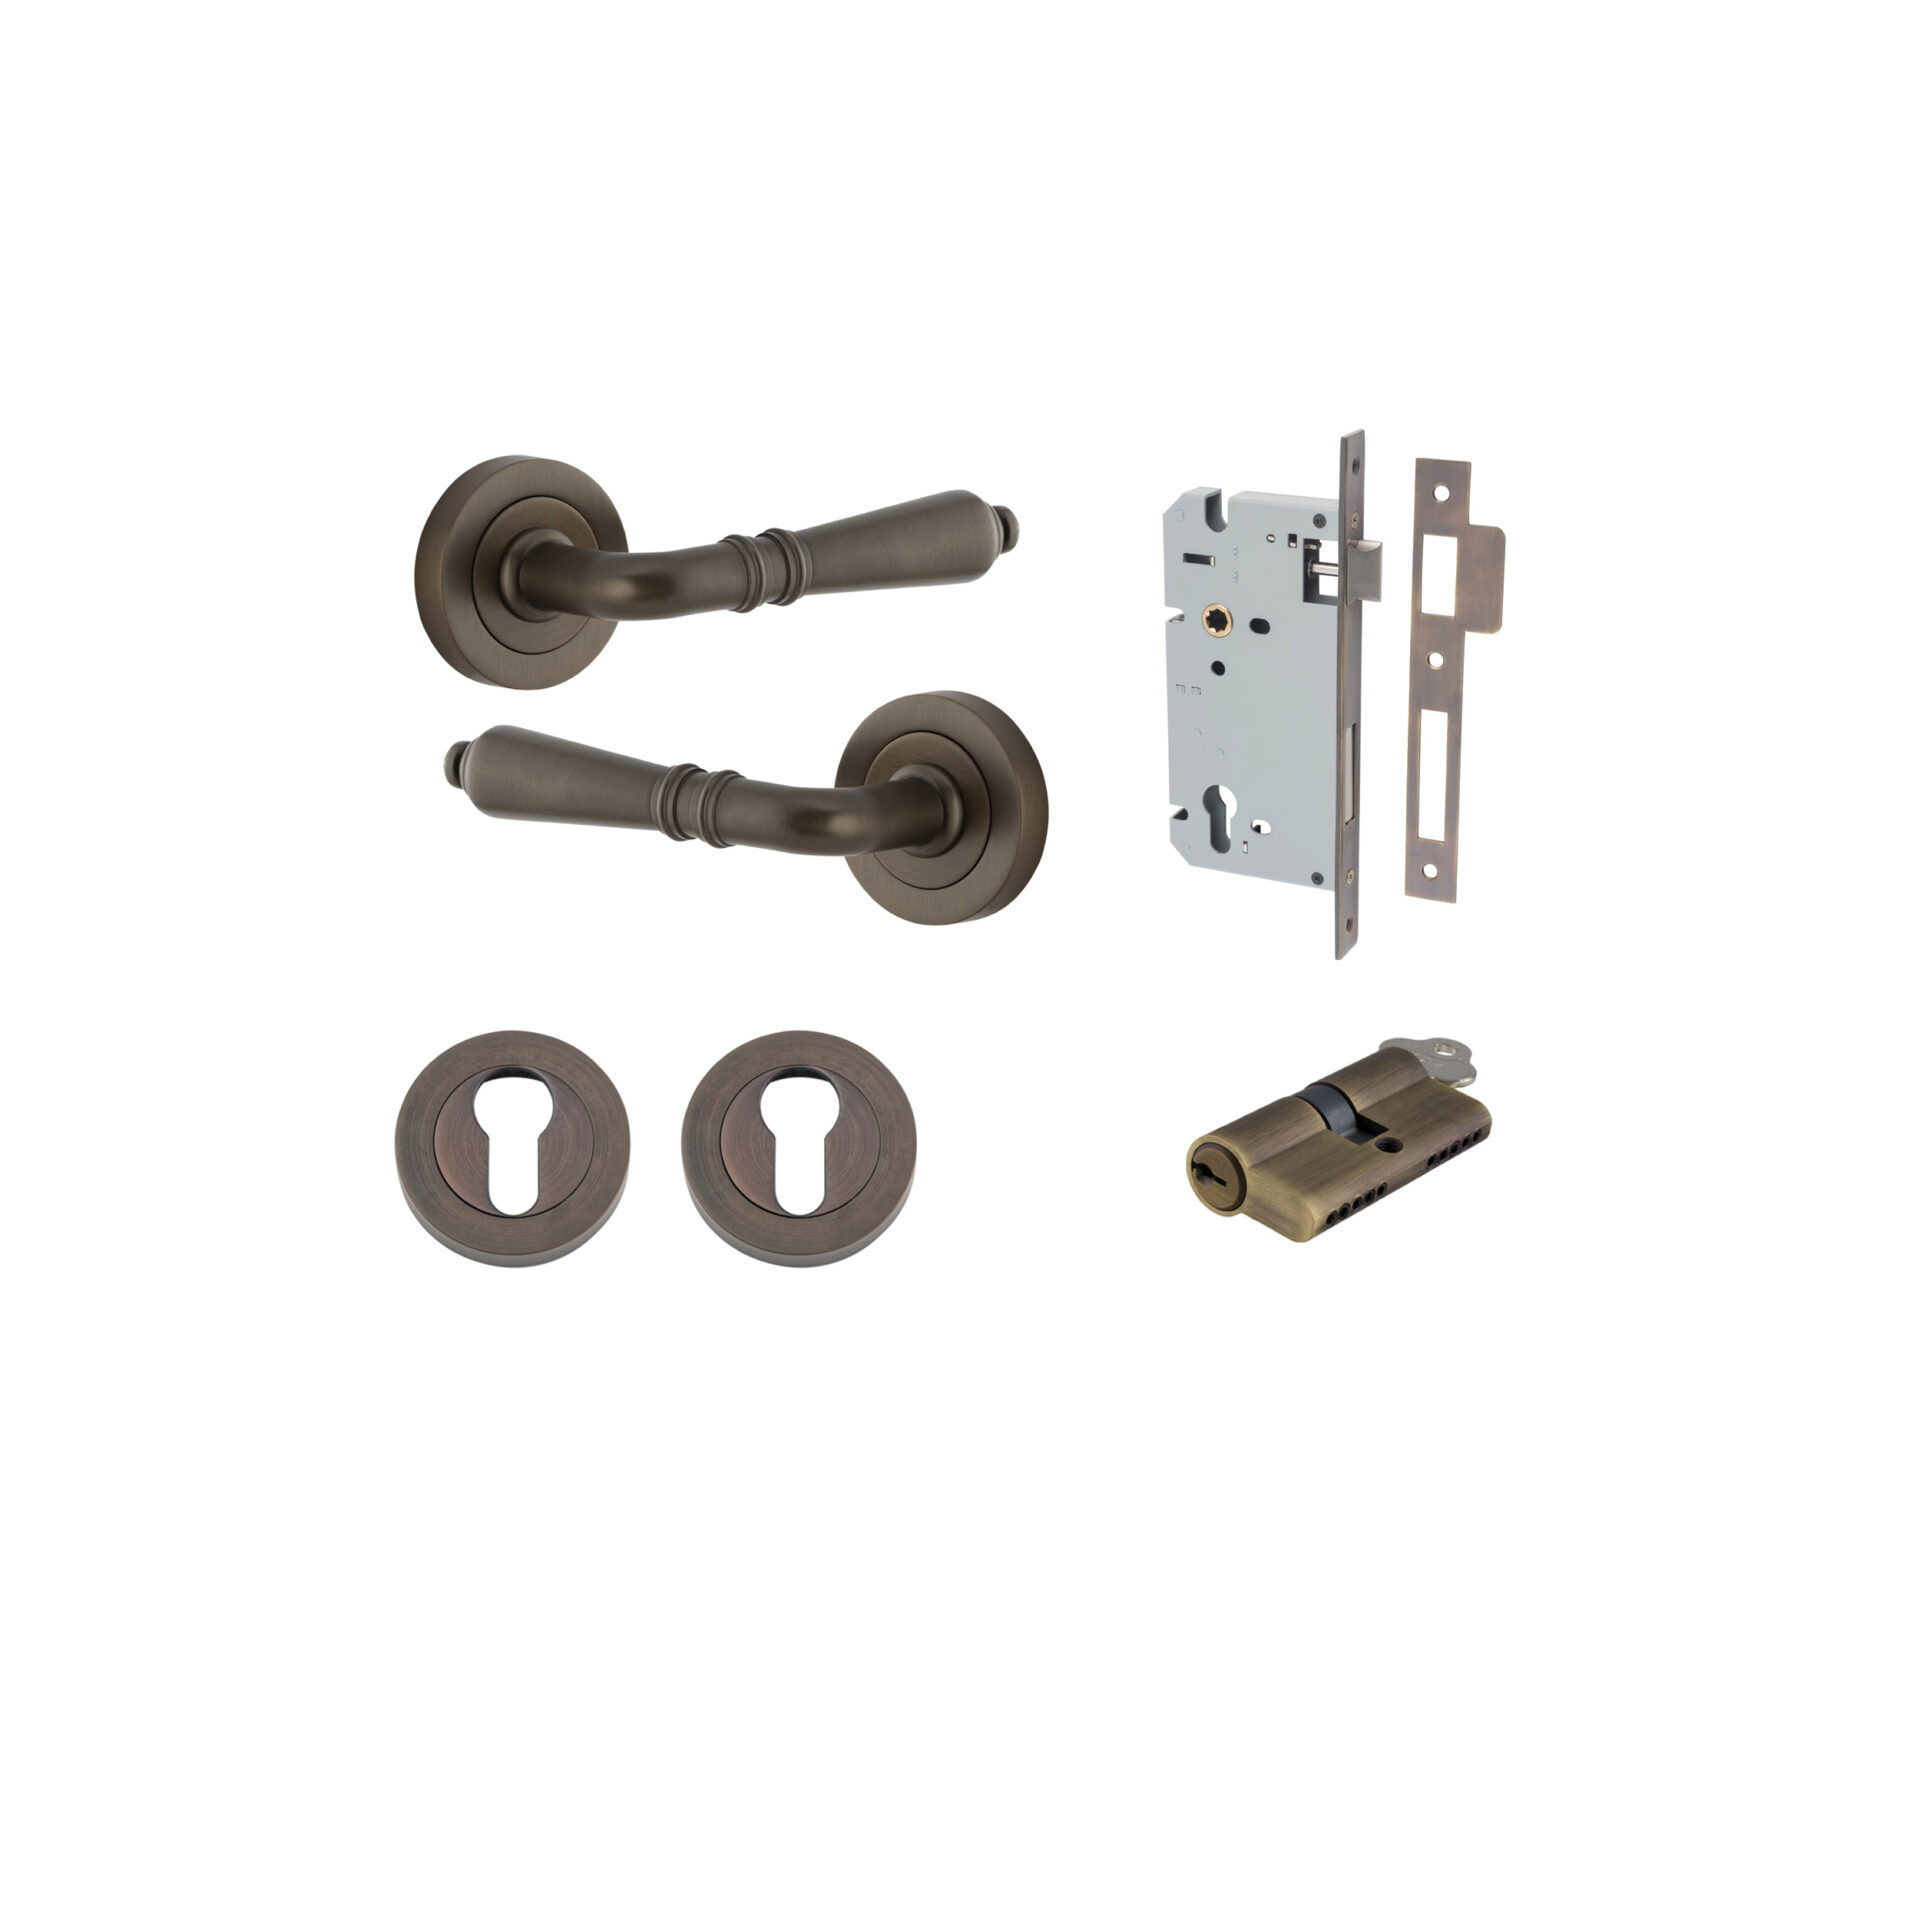 Sarlat Lever - Round Rose Entrance Kit with Separate High Security Lock